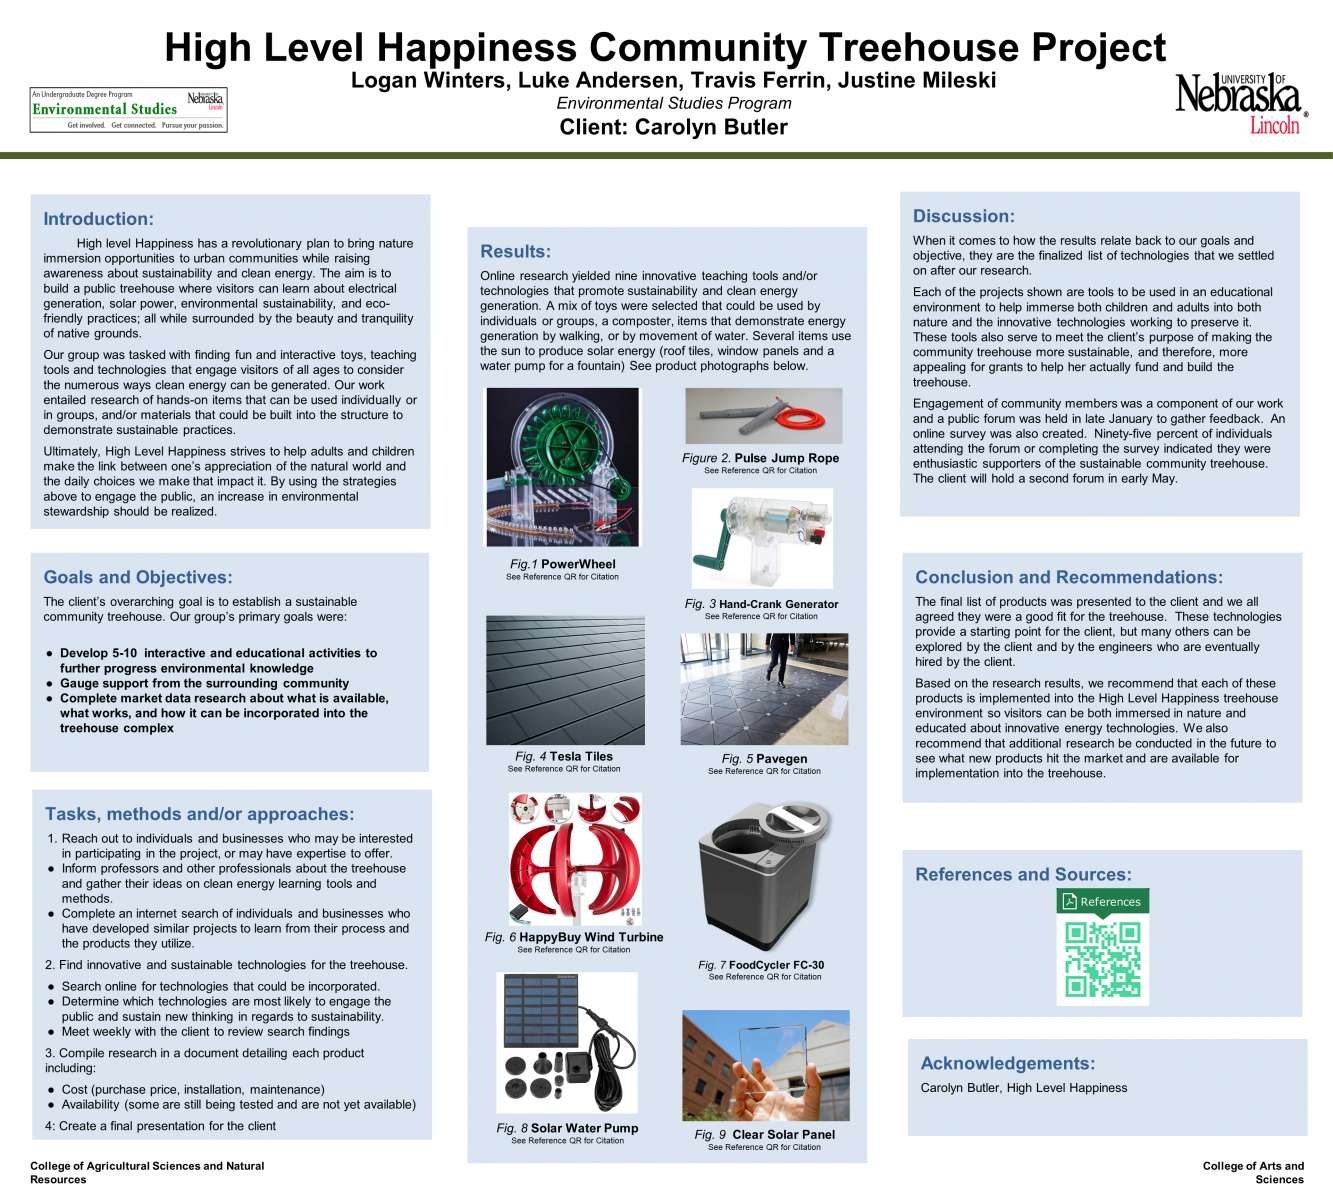 High-Level Happiness Community Treehouse Project